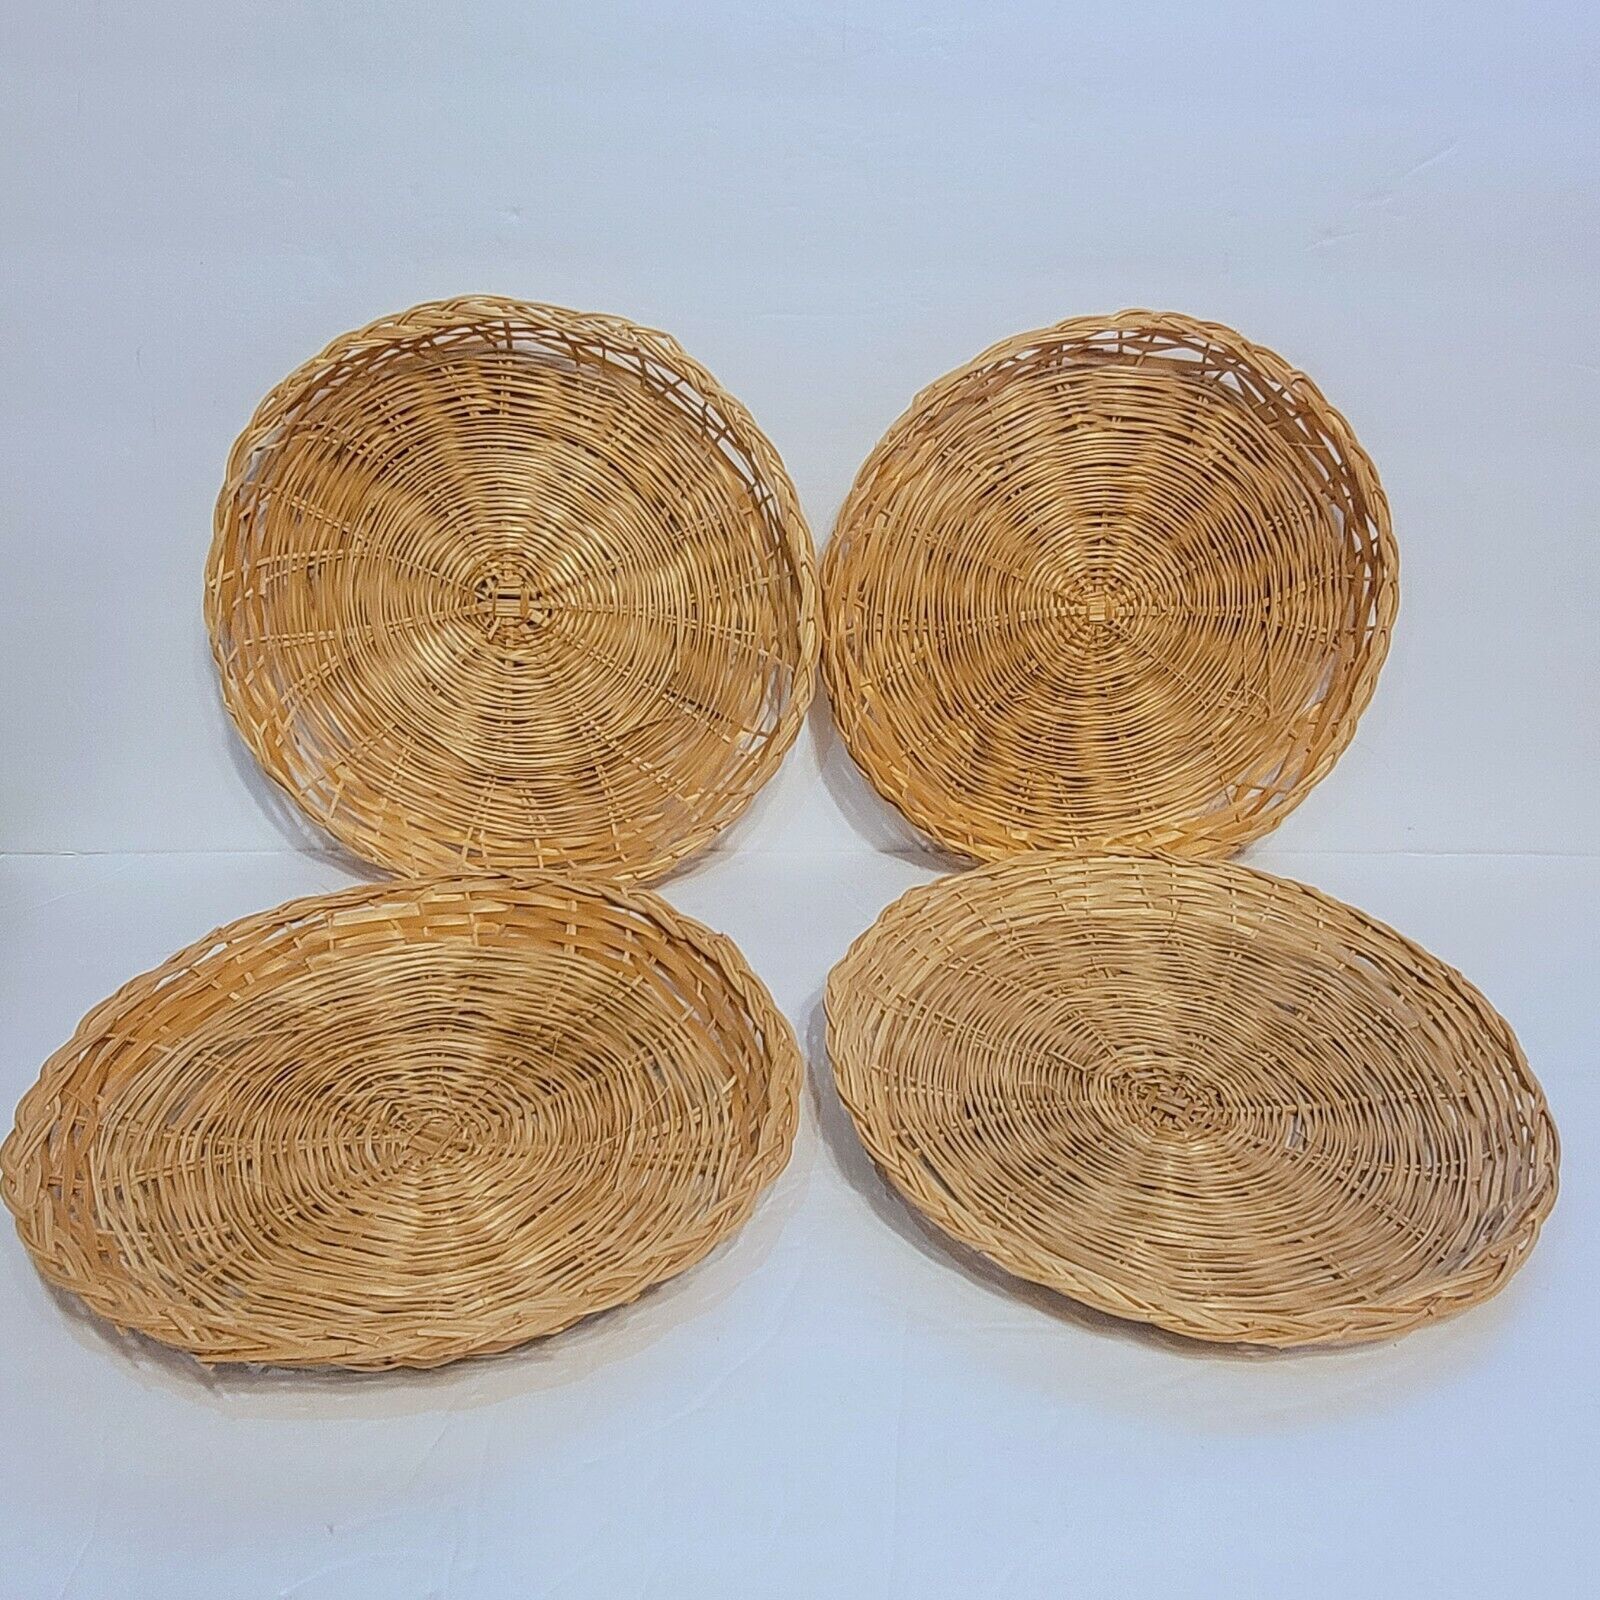 Primary image for Lot 4 WICKER PAPER PLATE HOLDERS Set Rattan Natural Color Woven  Picnic Camping